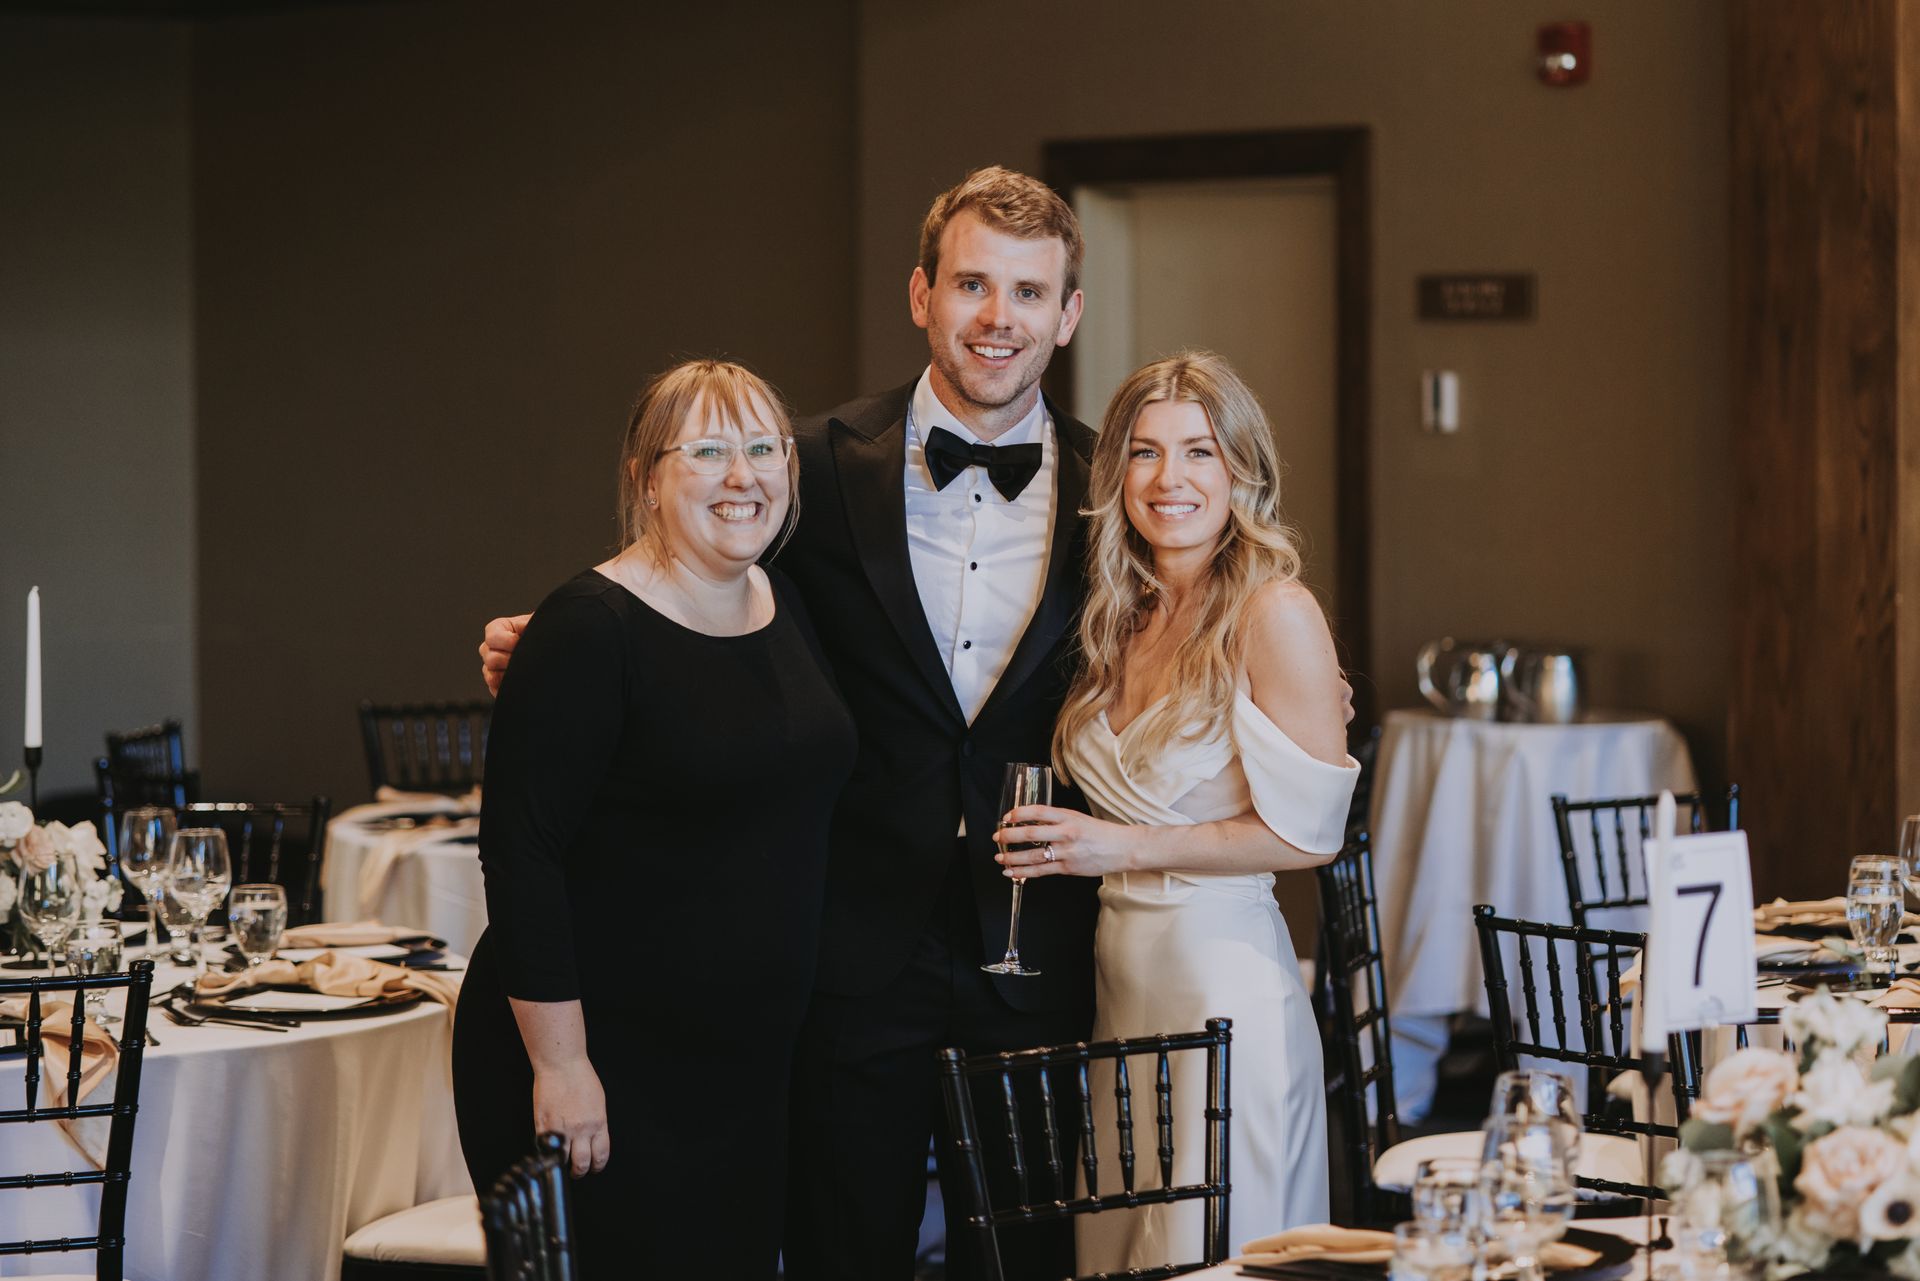 A bride and groom are posing for a picture with their mother at their wedding reception.